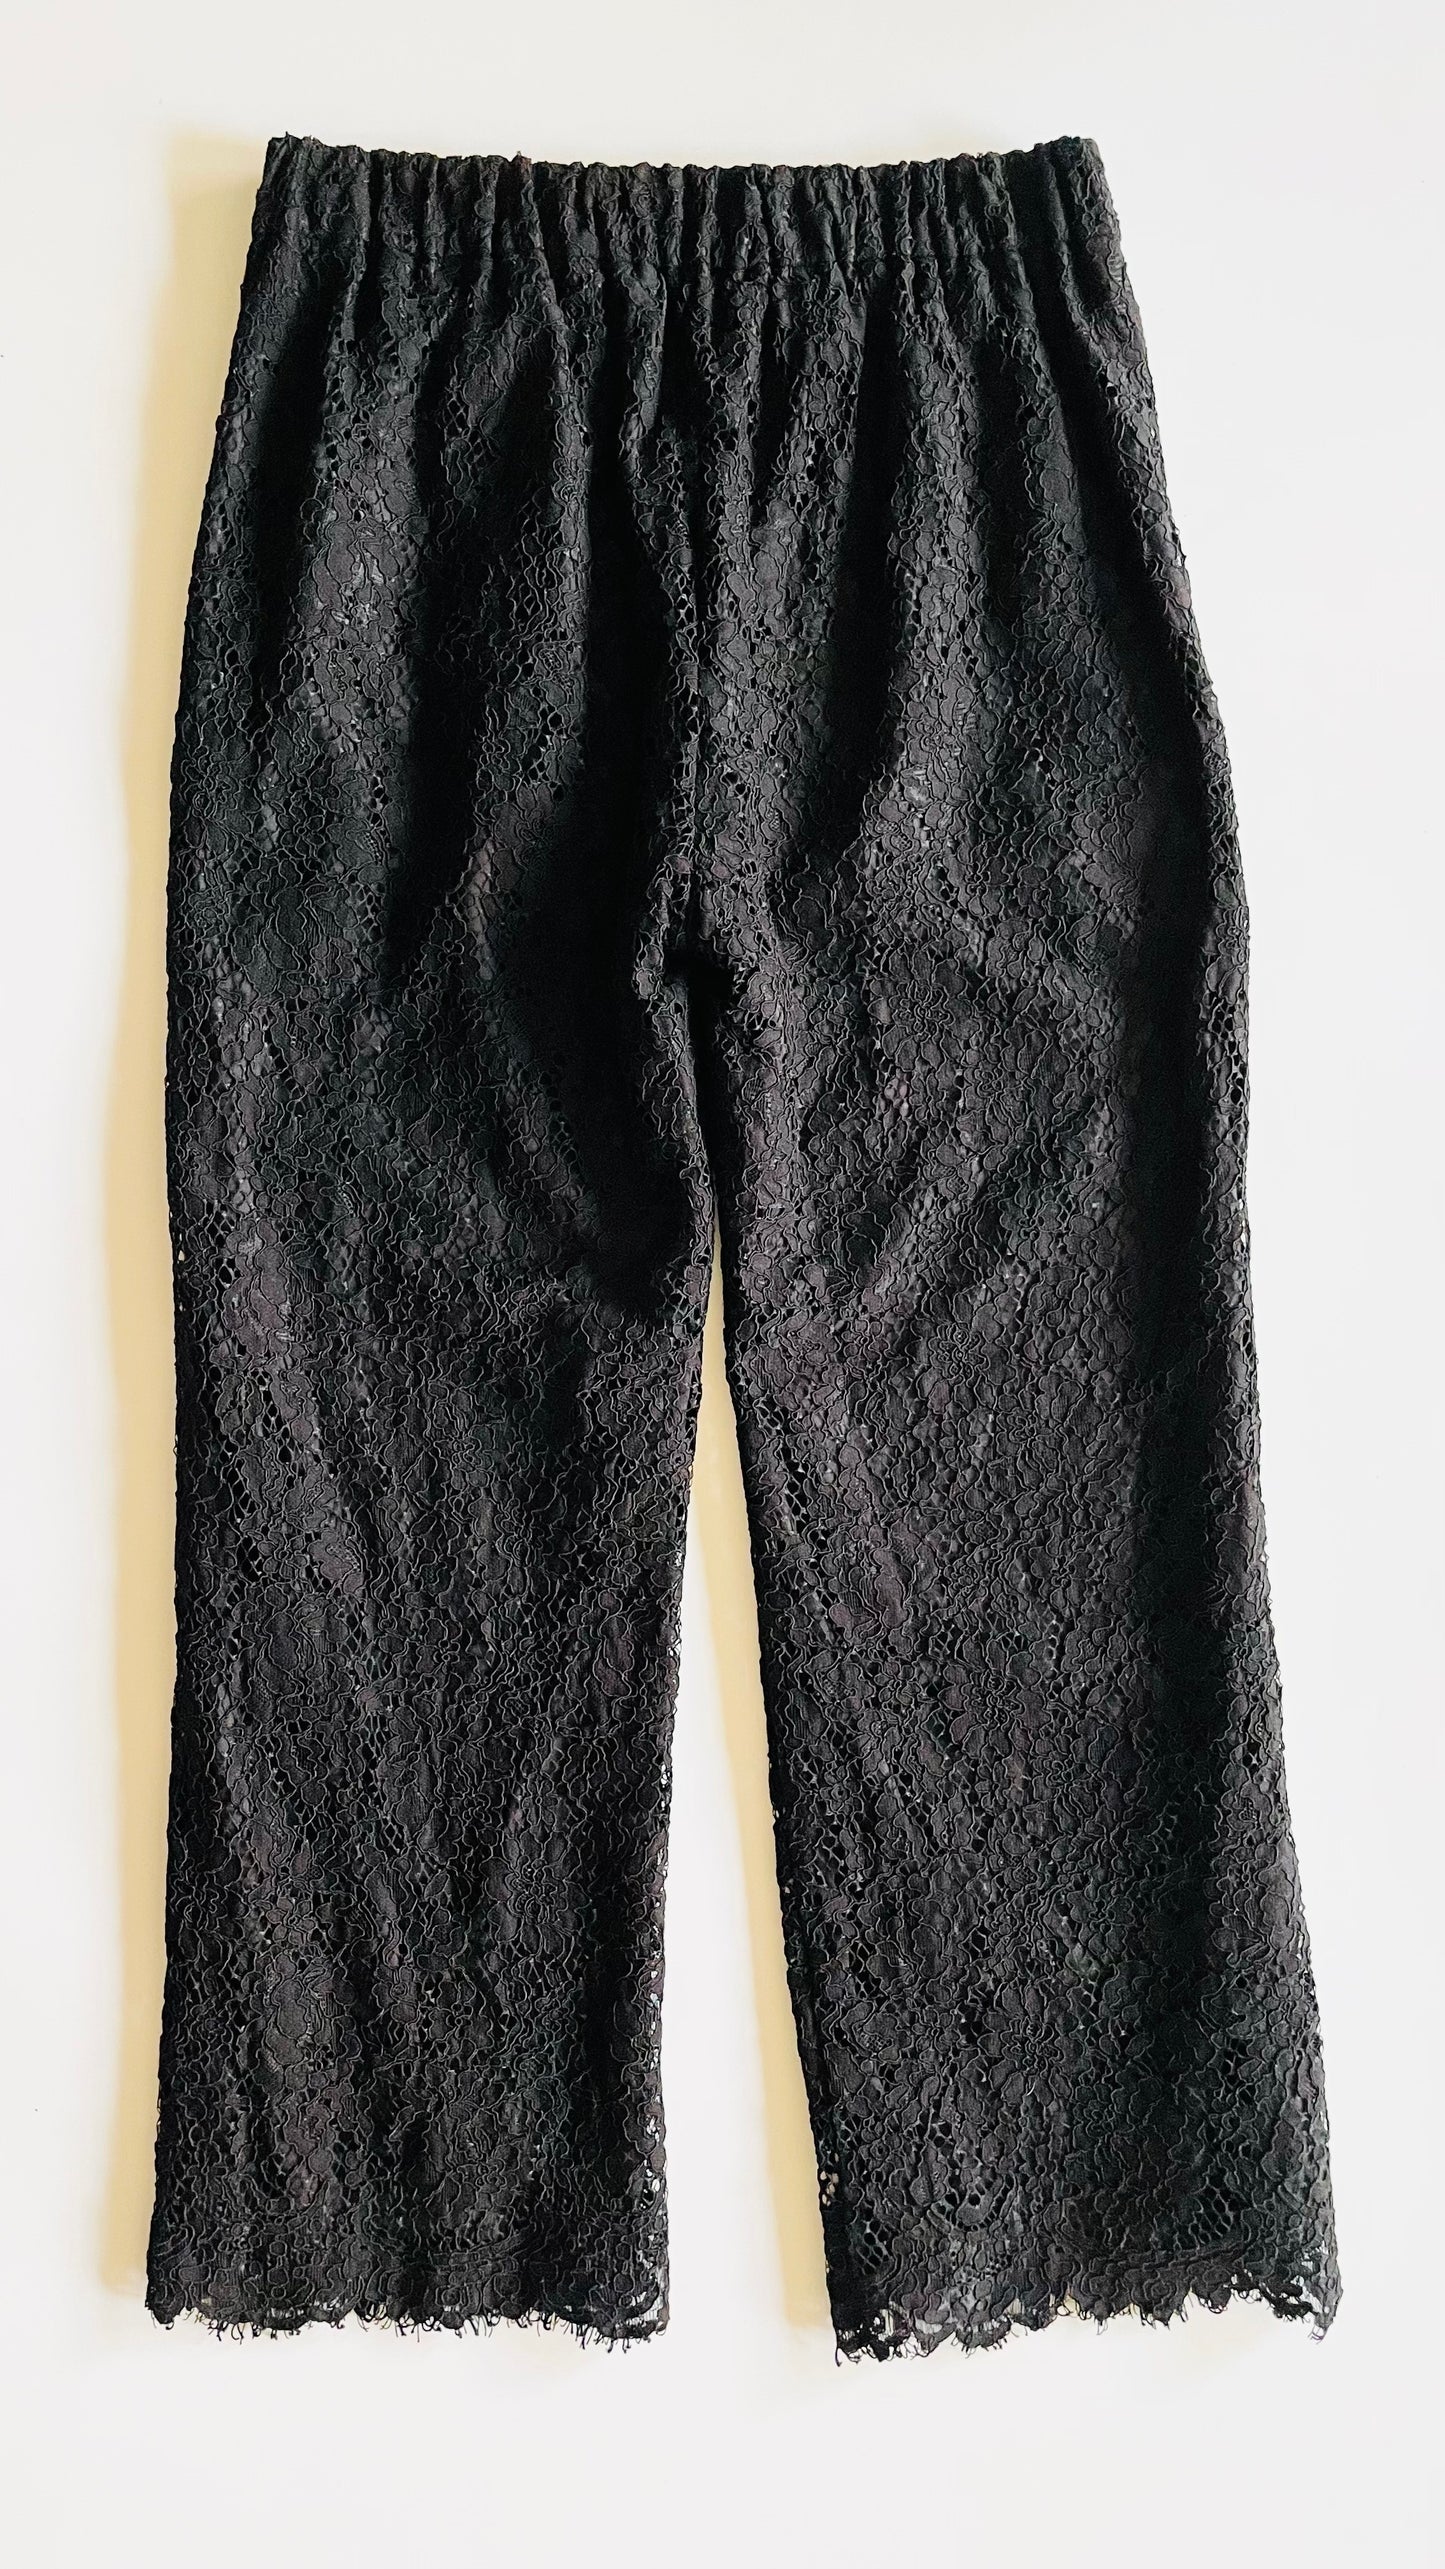 Pre-Loved black lace high rise trousers - Size 4